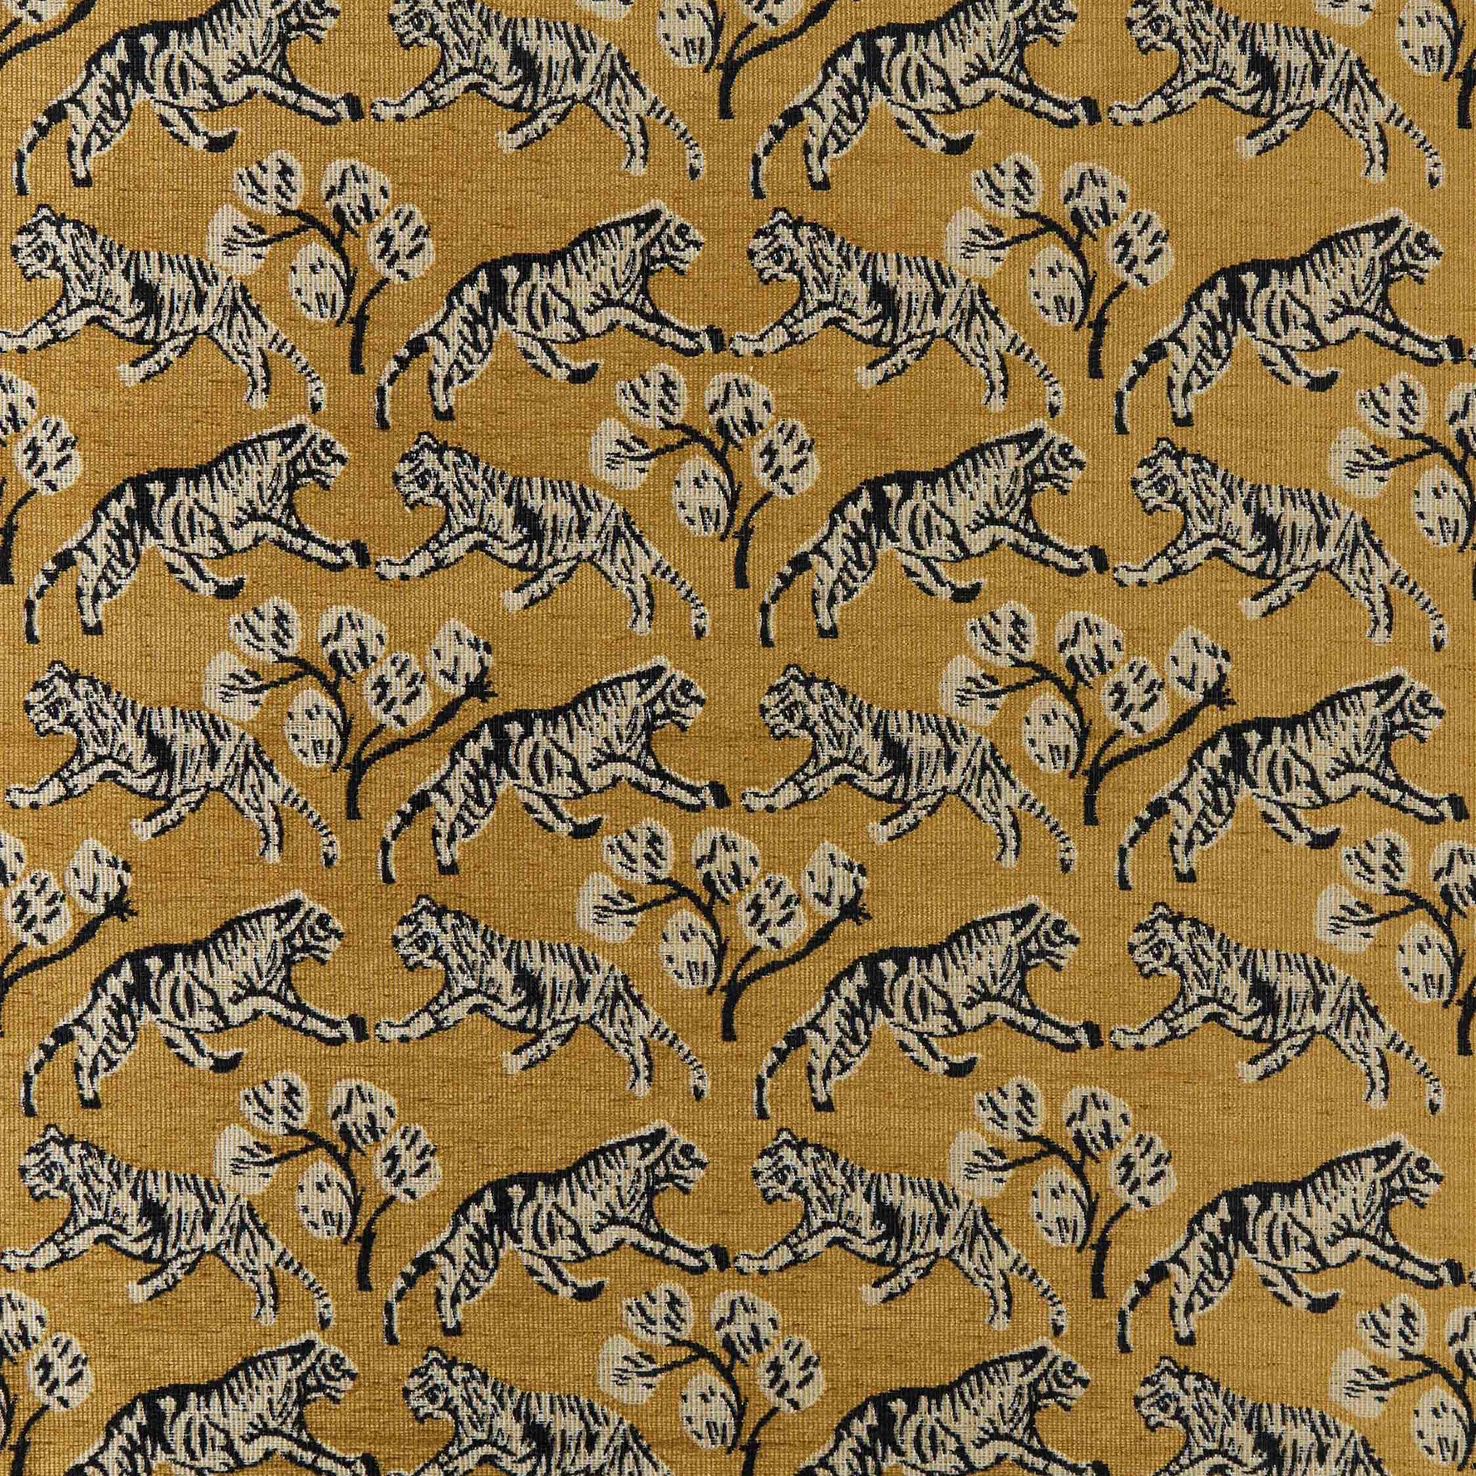 Tiger Jacquard Fabric by S. S. S.